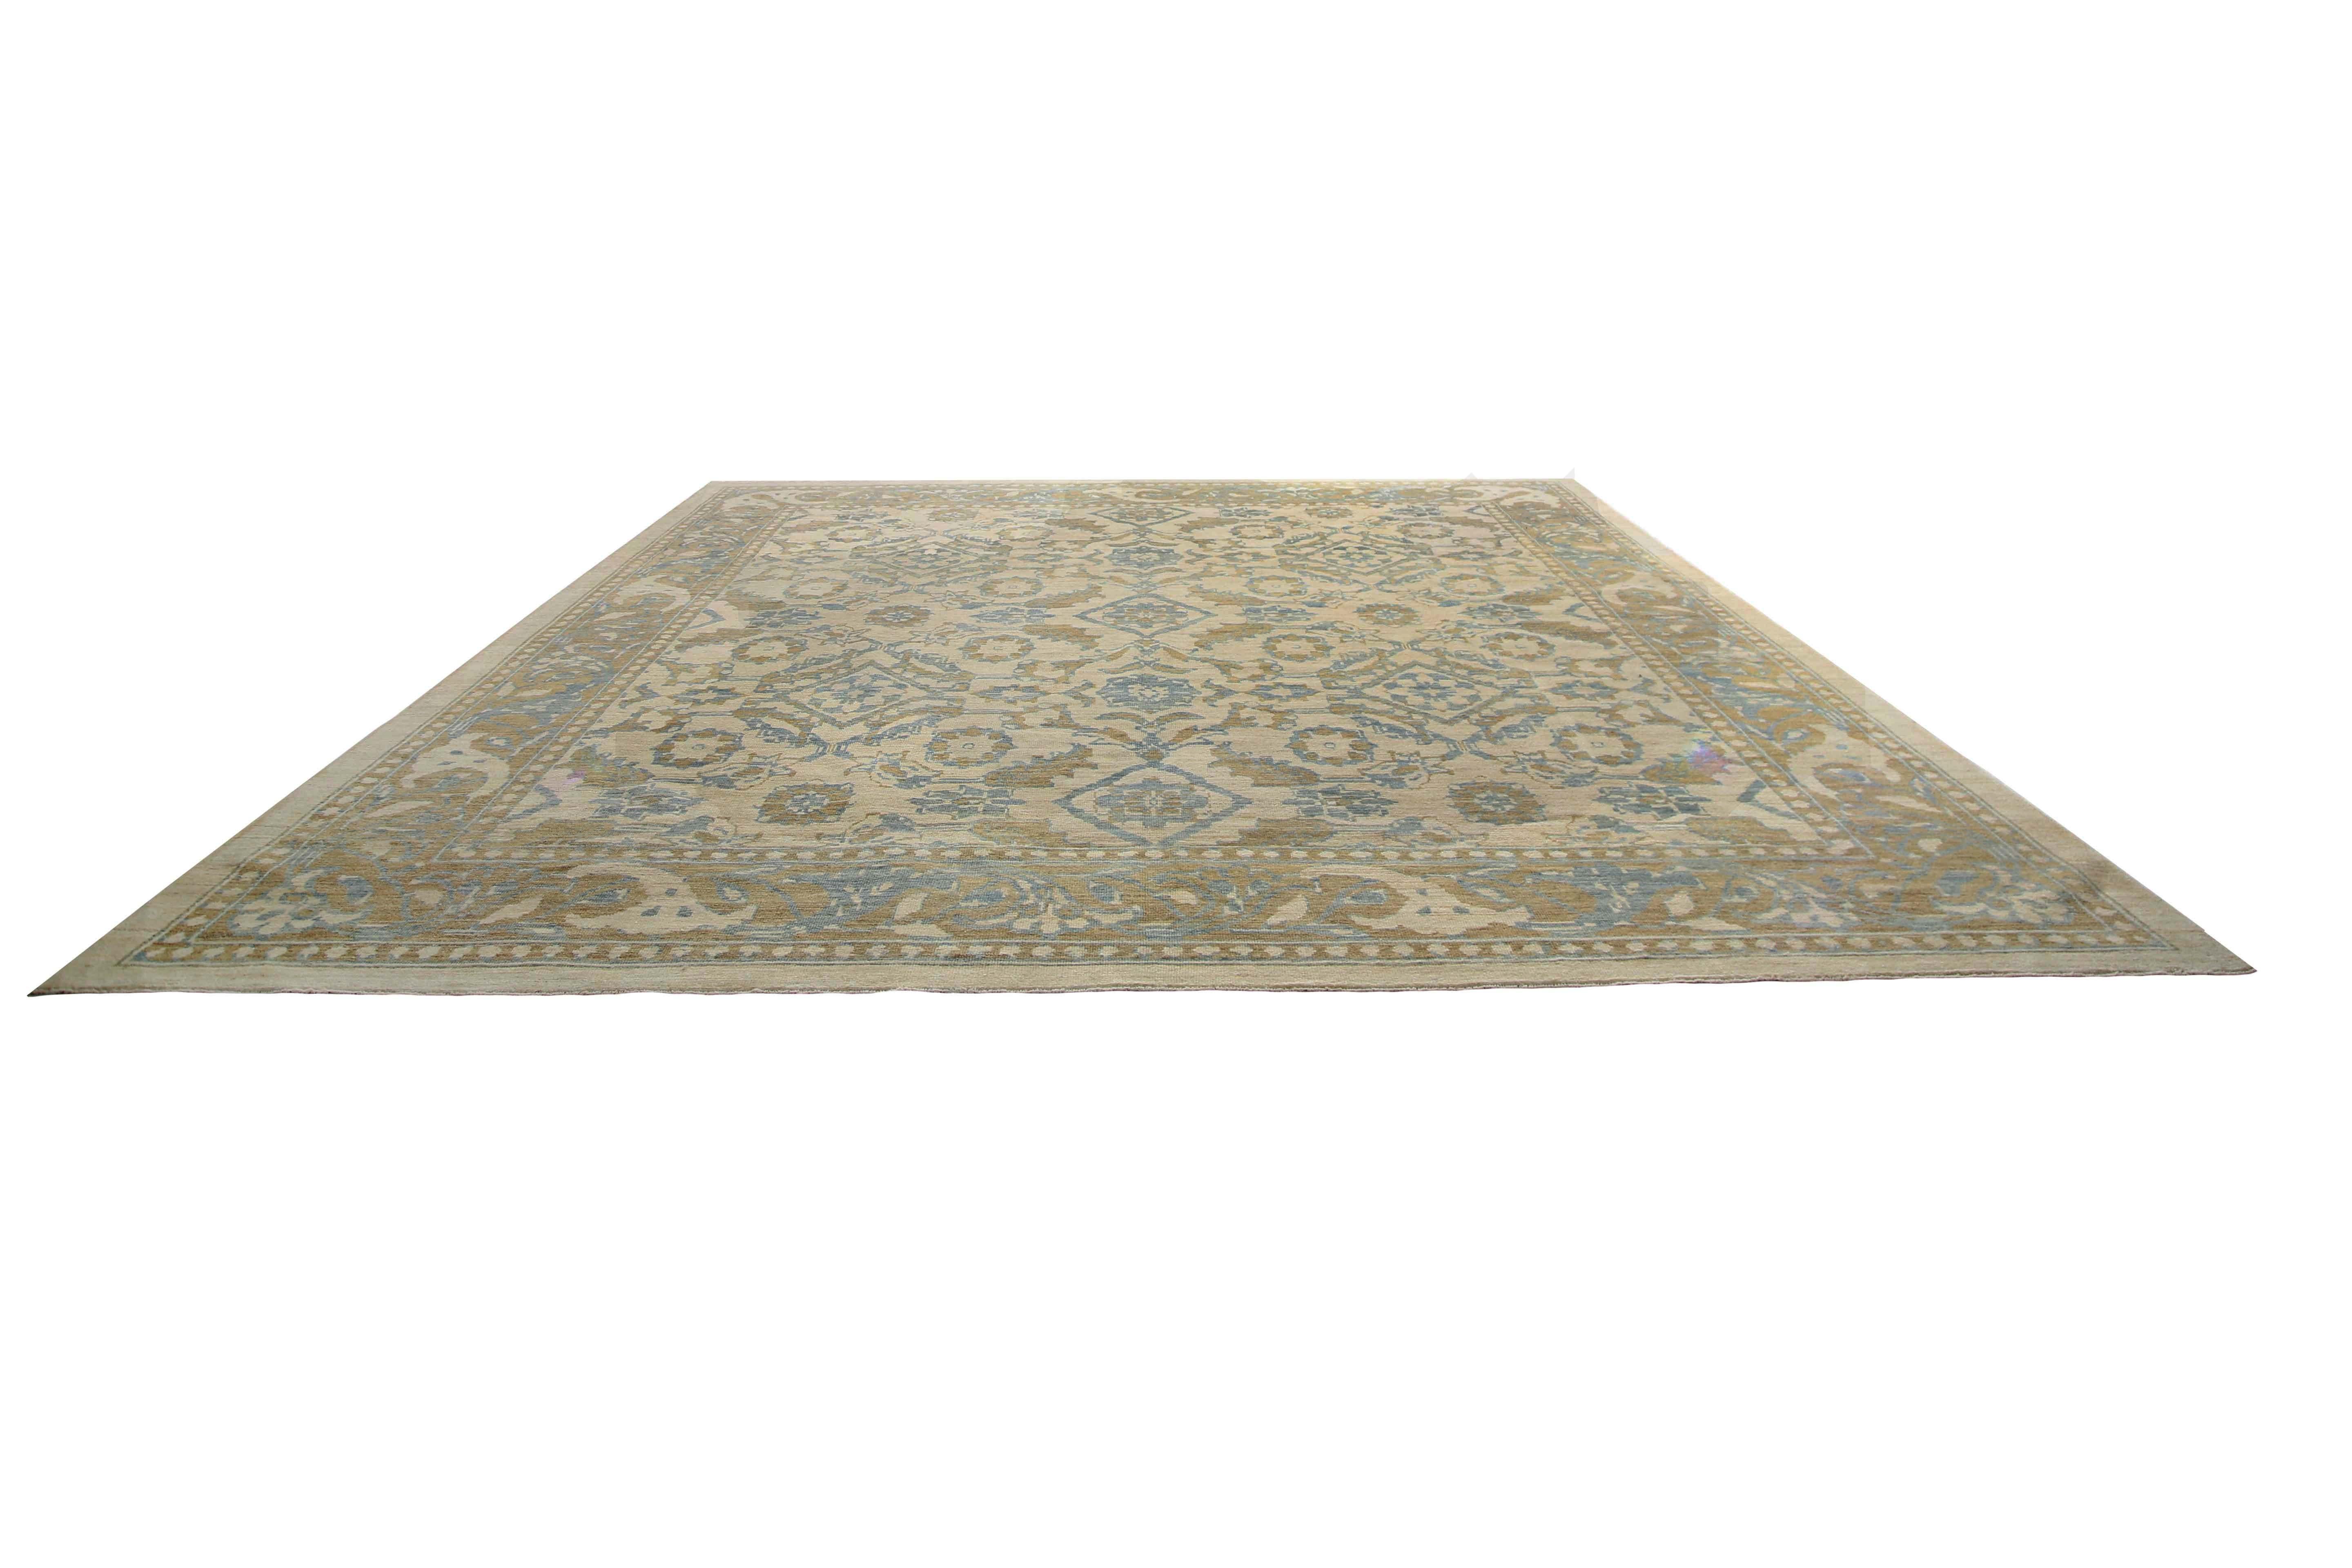 Luxurious Handmade Sultanabad Rug - Transitional Design, Blue, Green, and Yellow For Sale 2